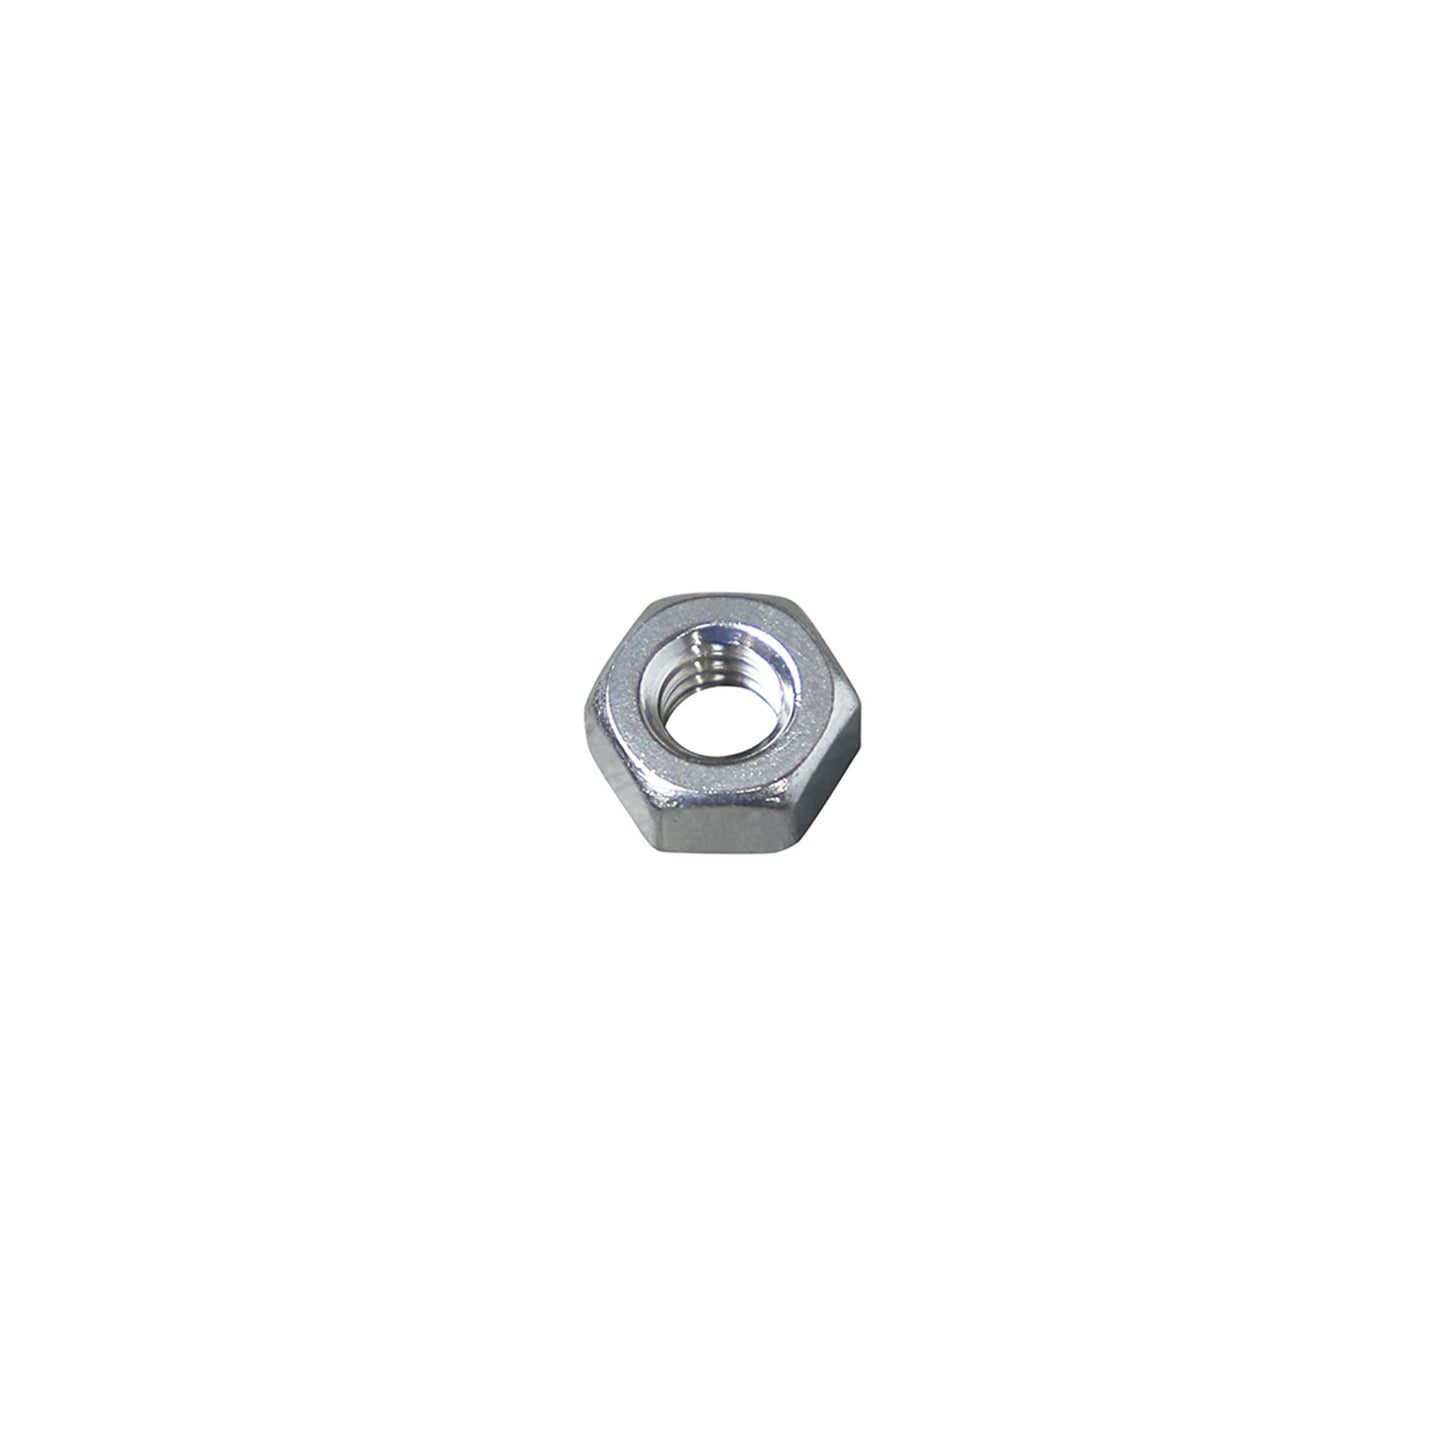 1/4"-20 Conquest Hex Nut - 304 Stainless Steel